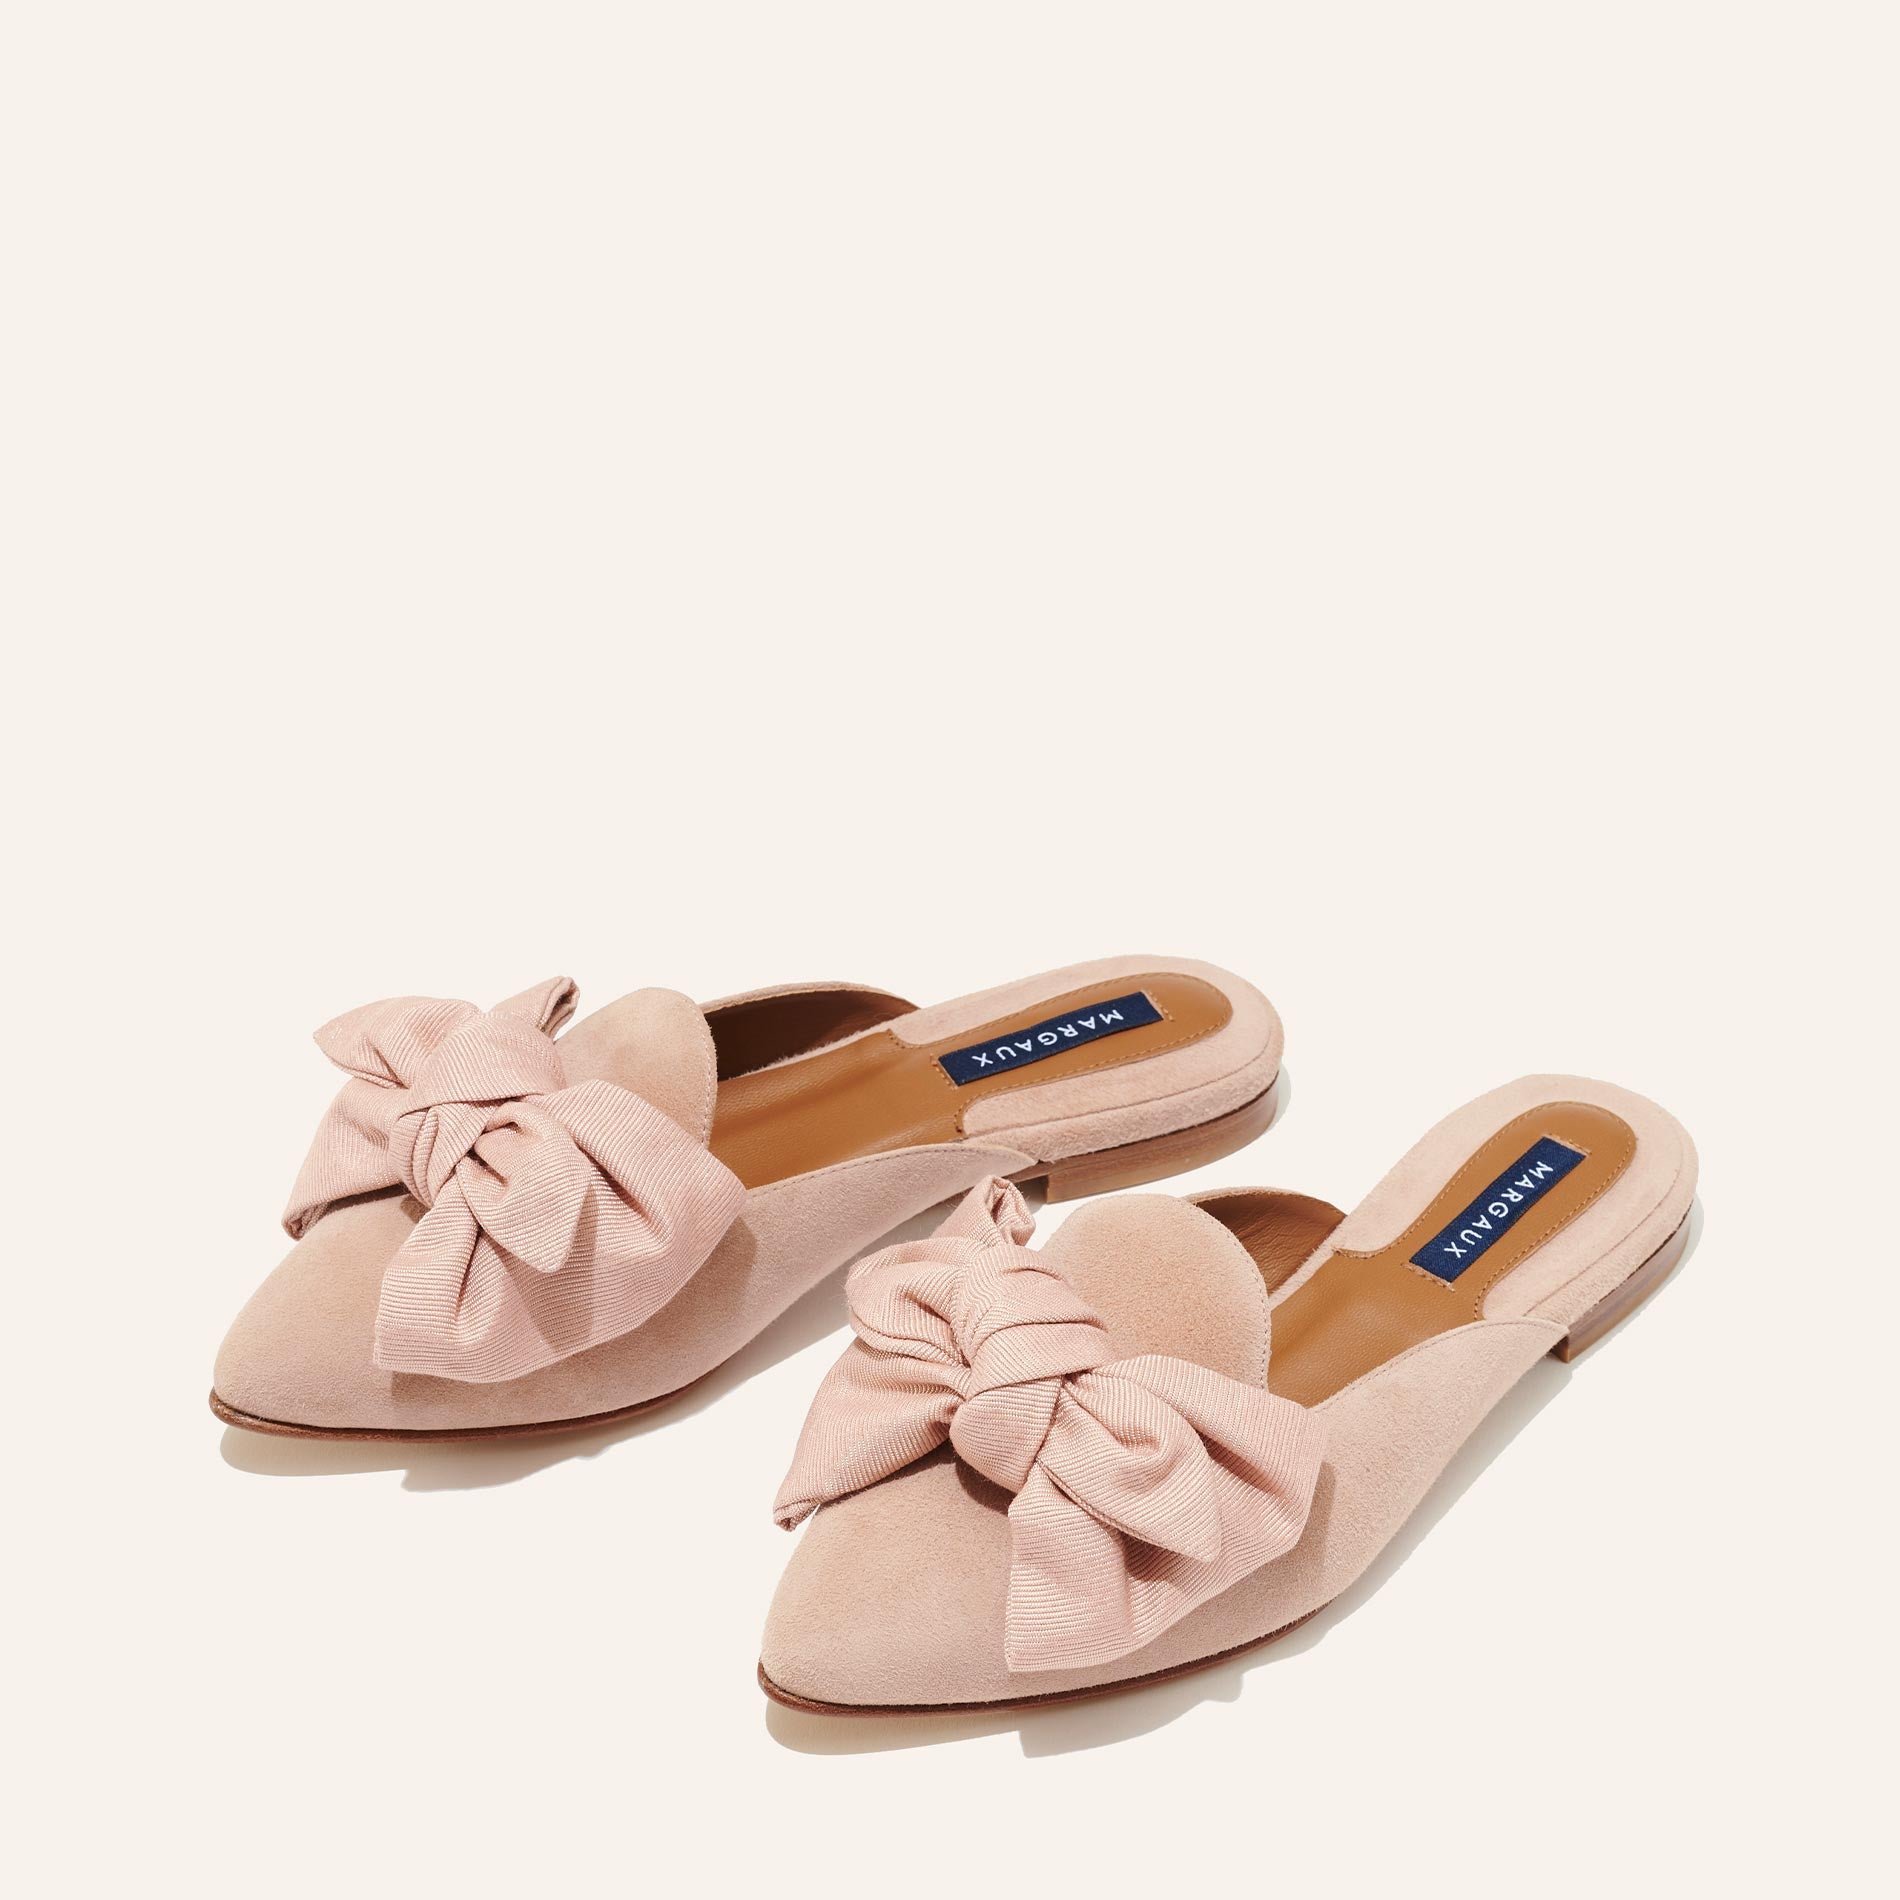 Margaux's classic and comfortable Mule, made in Spain from soft pink suede and finished with a rose grosgrain bow